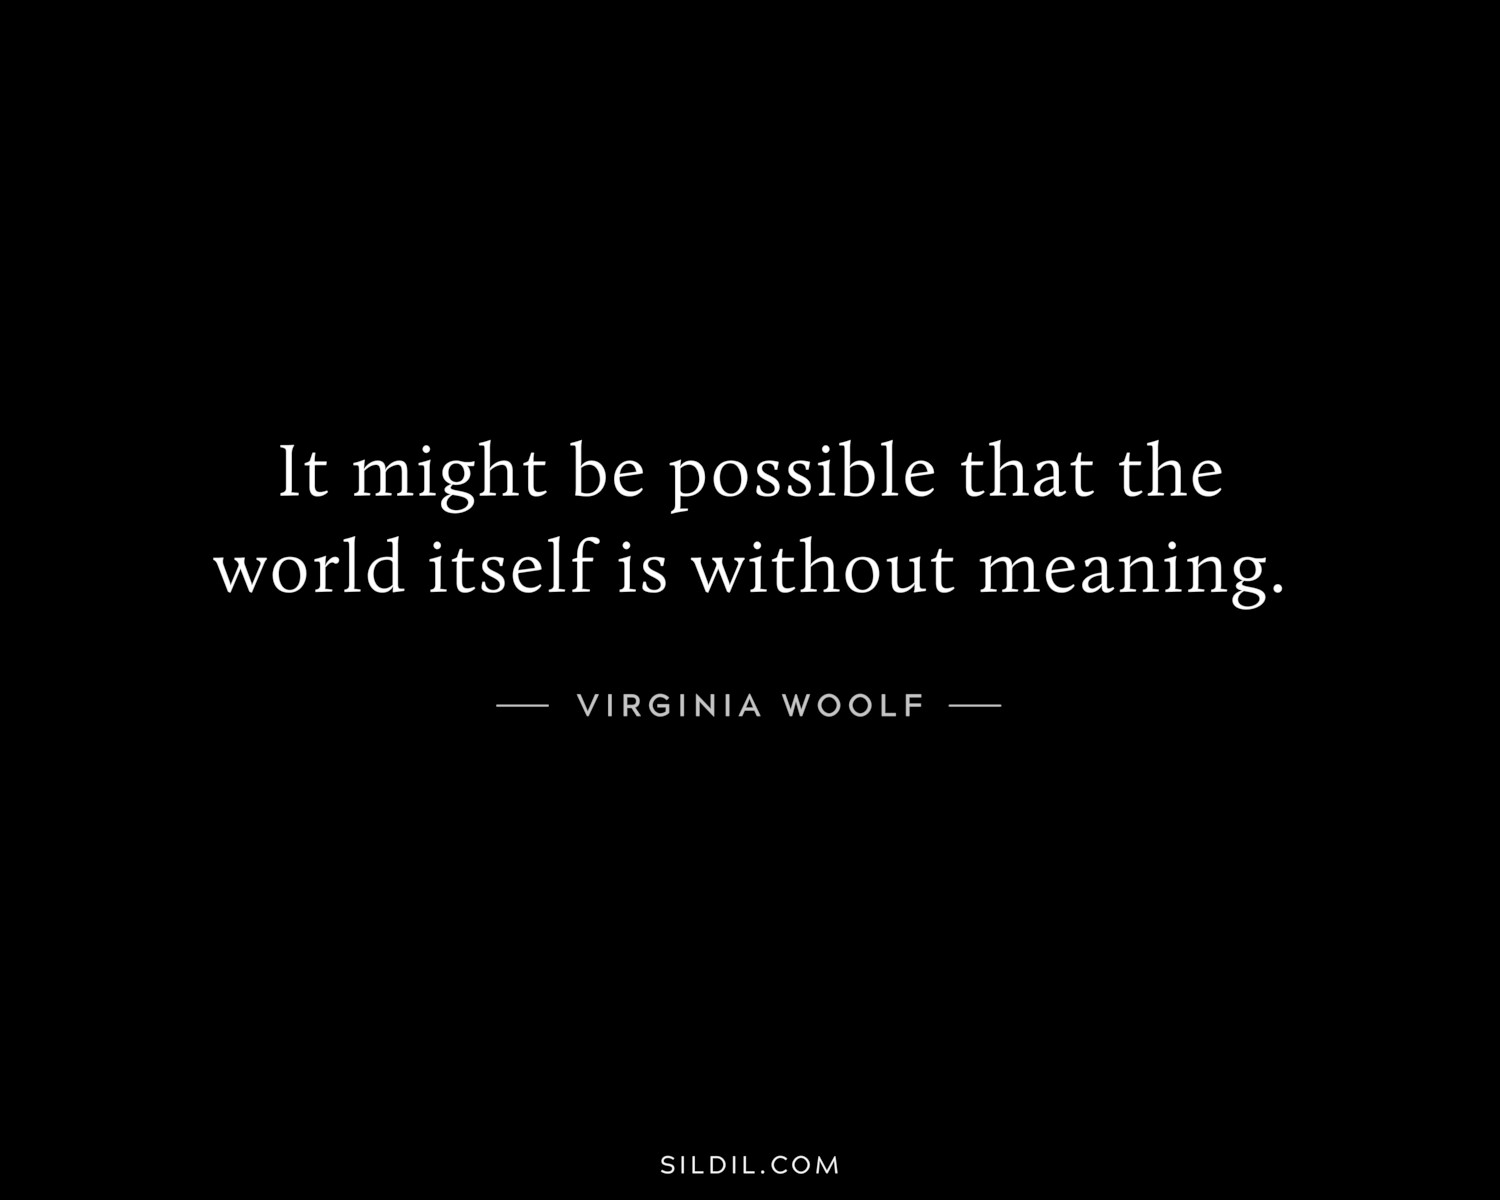 It might be possible that the world itself is without meaning.